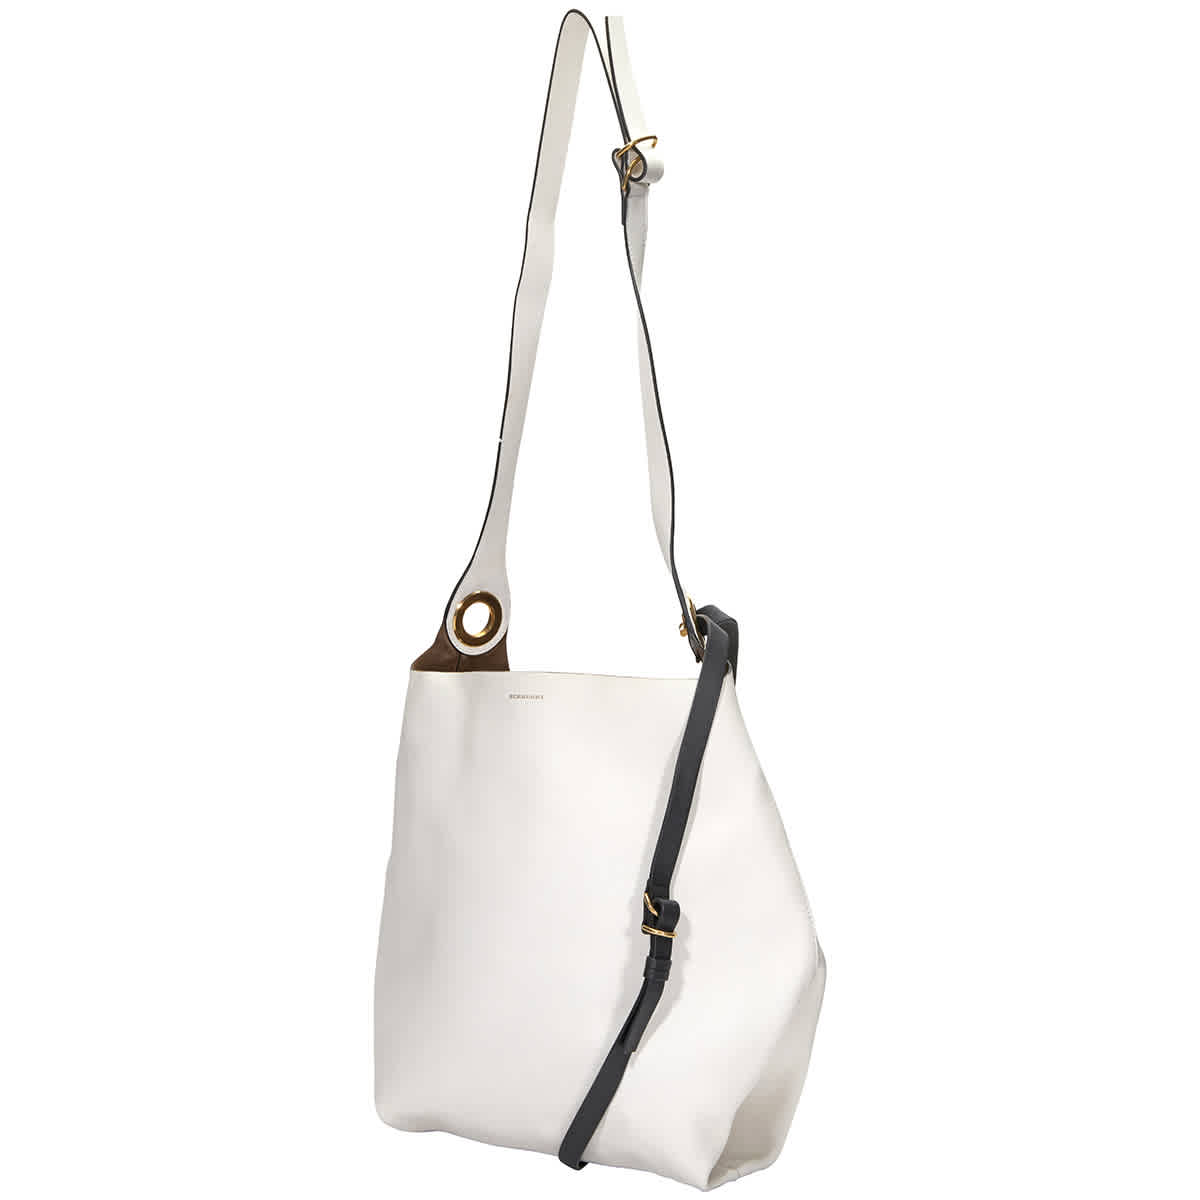 Burberry The Leather Grommet Detail Bag In Chalk White